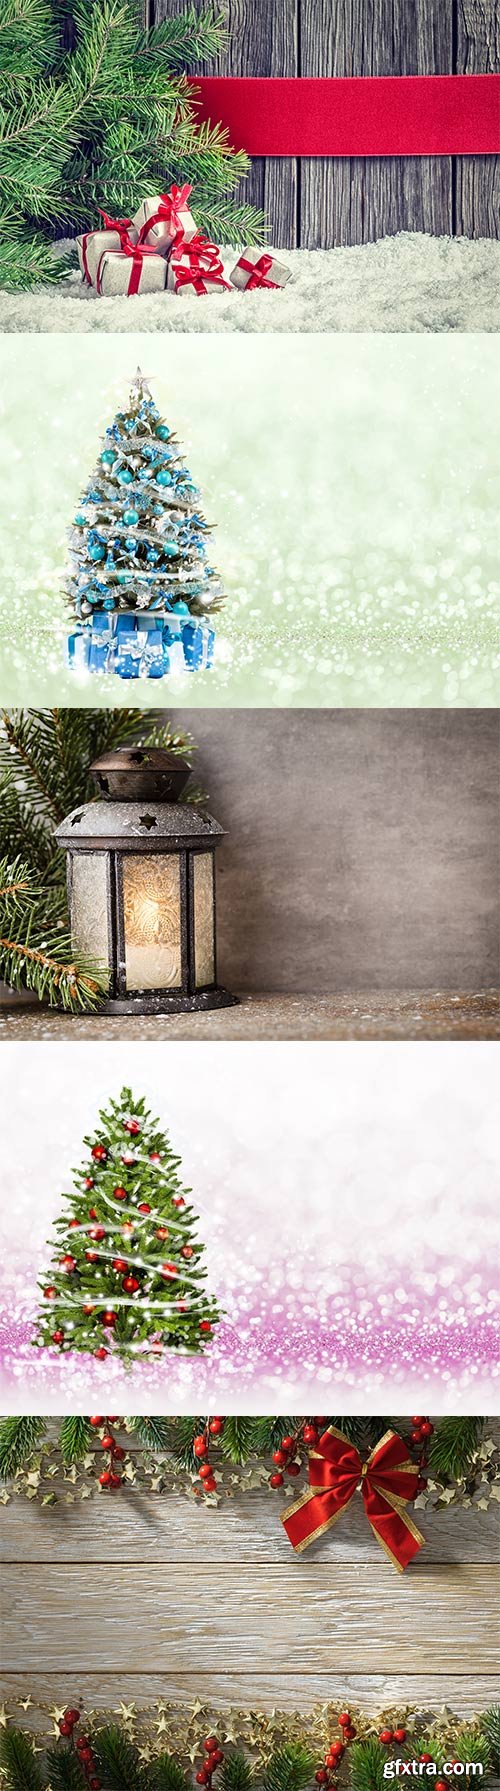 Christmas winter backgrounds - 9